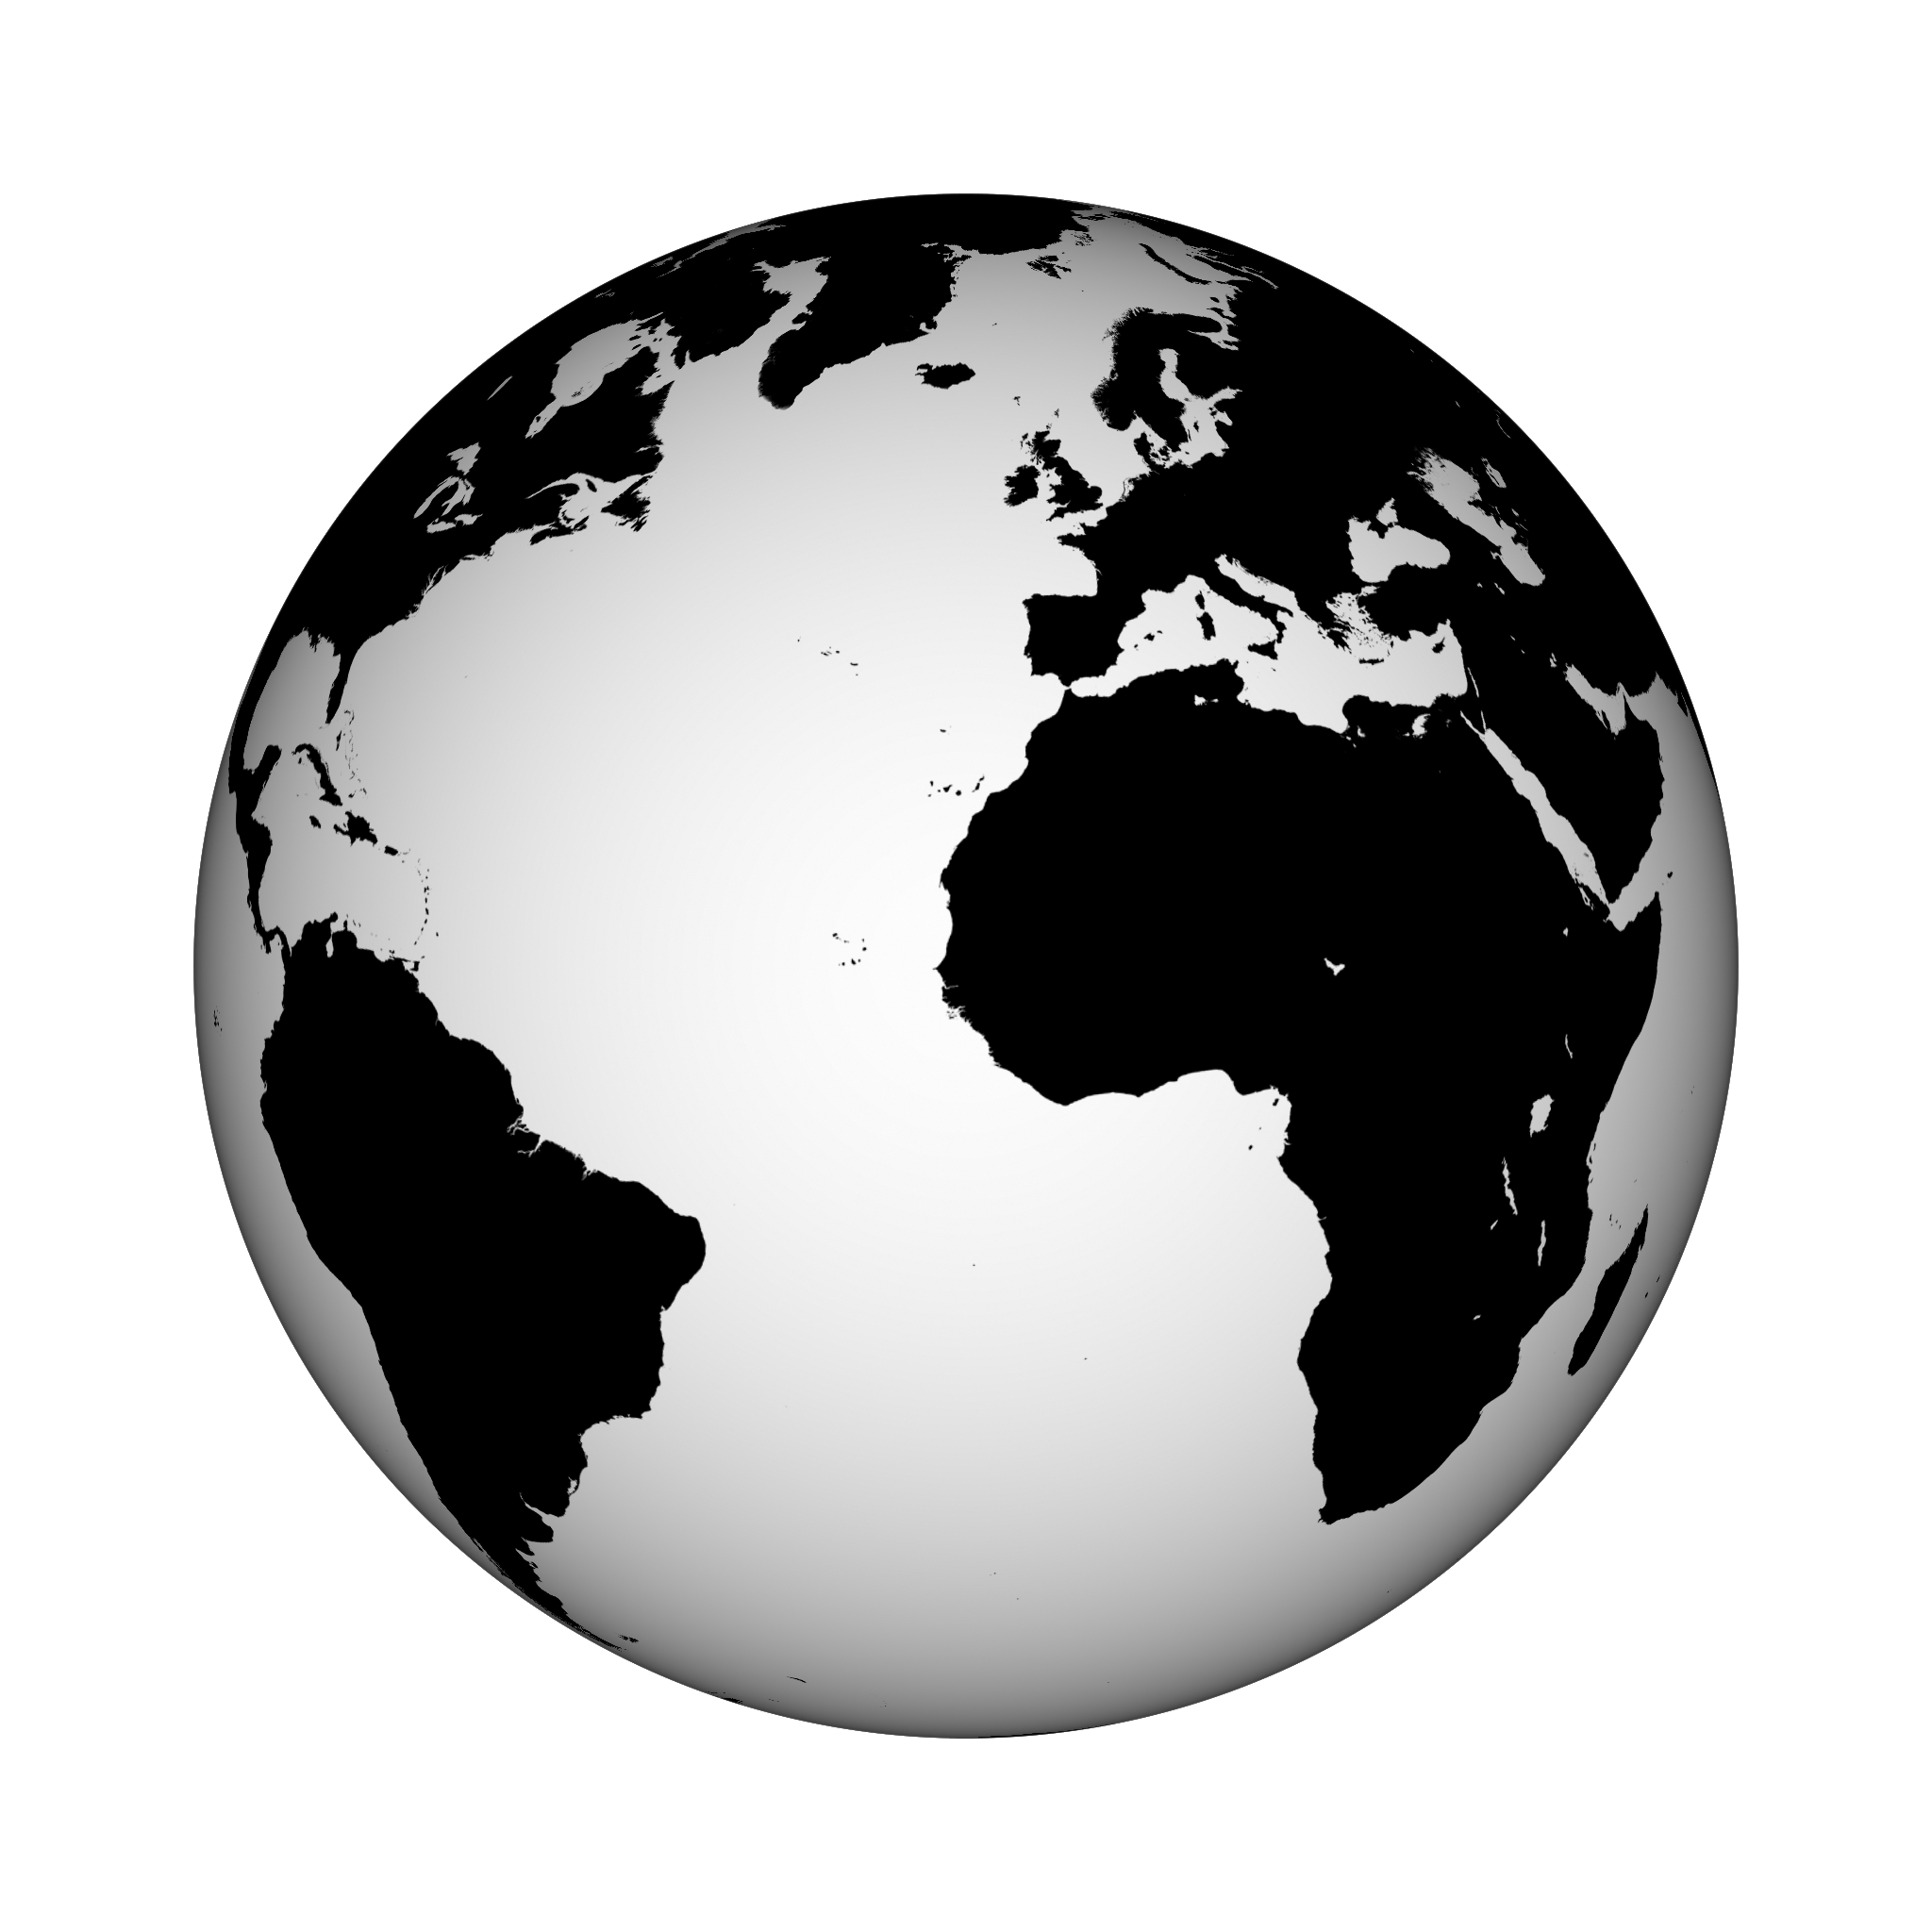 Black and White Earth Logo - Globe Png Black And White Png & Transparent Images #3435 - PNGio